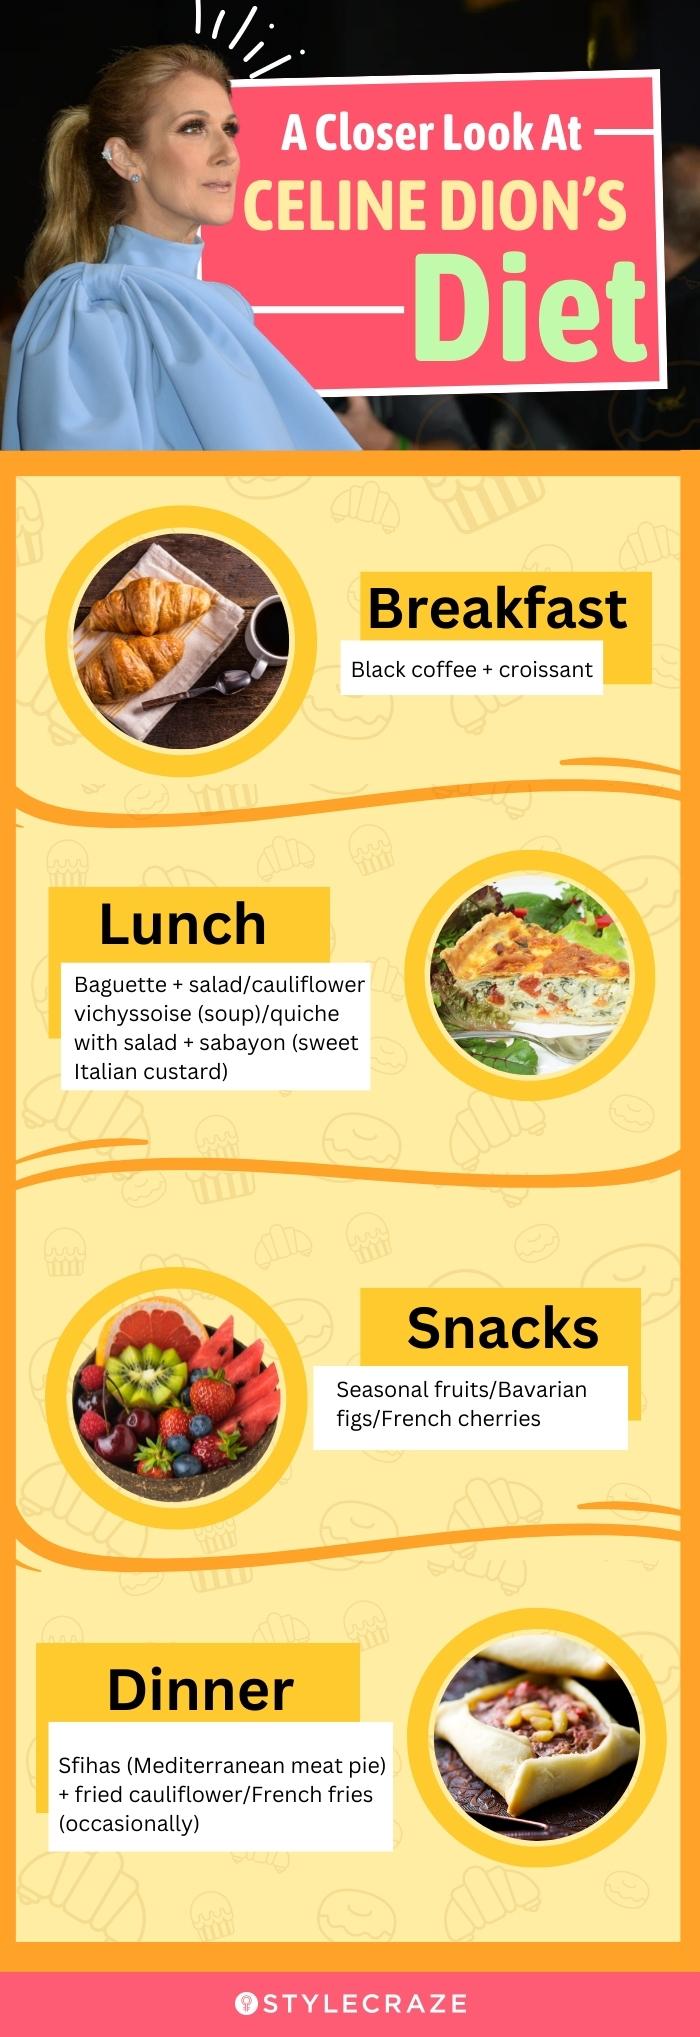 a closer look at celine dion’s diet (infographic)